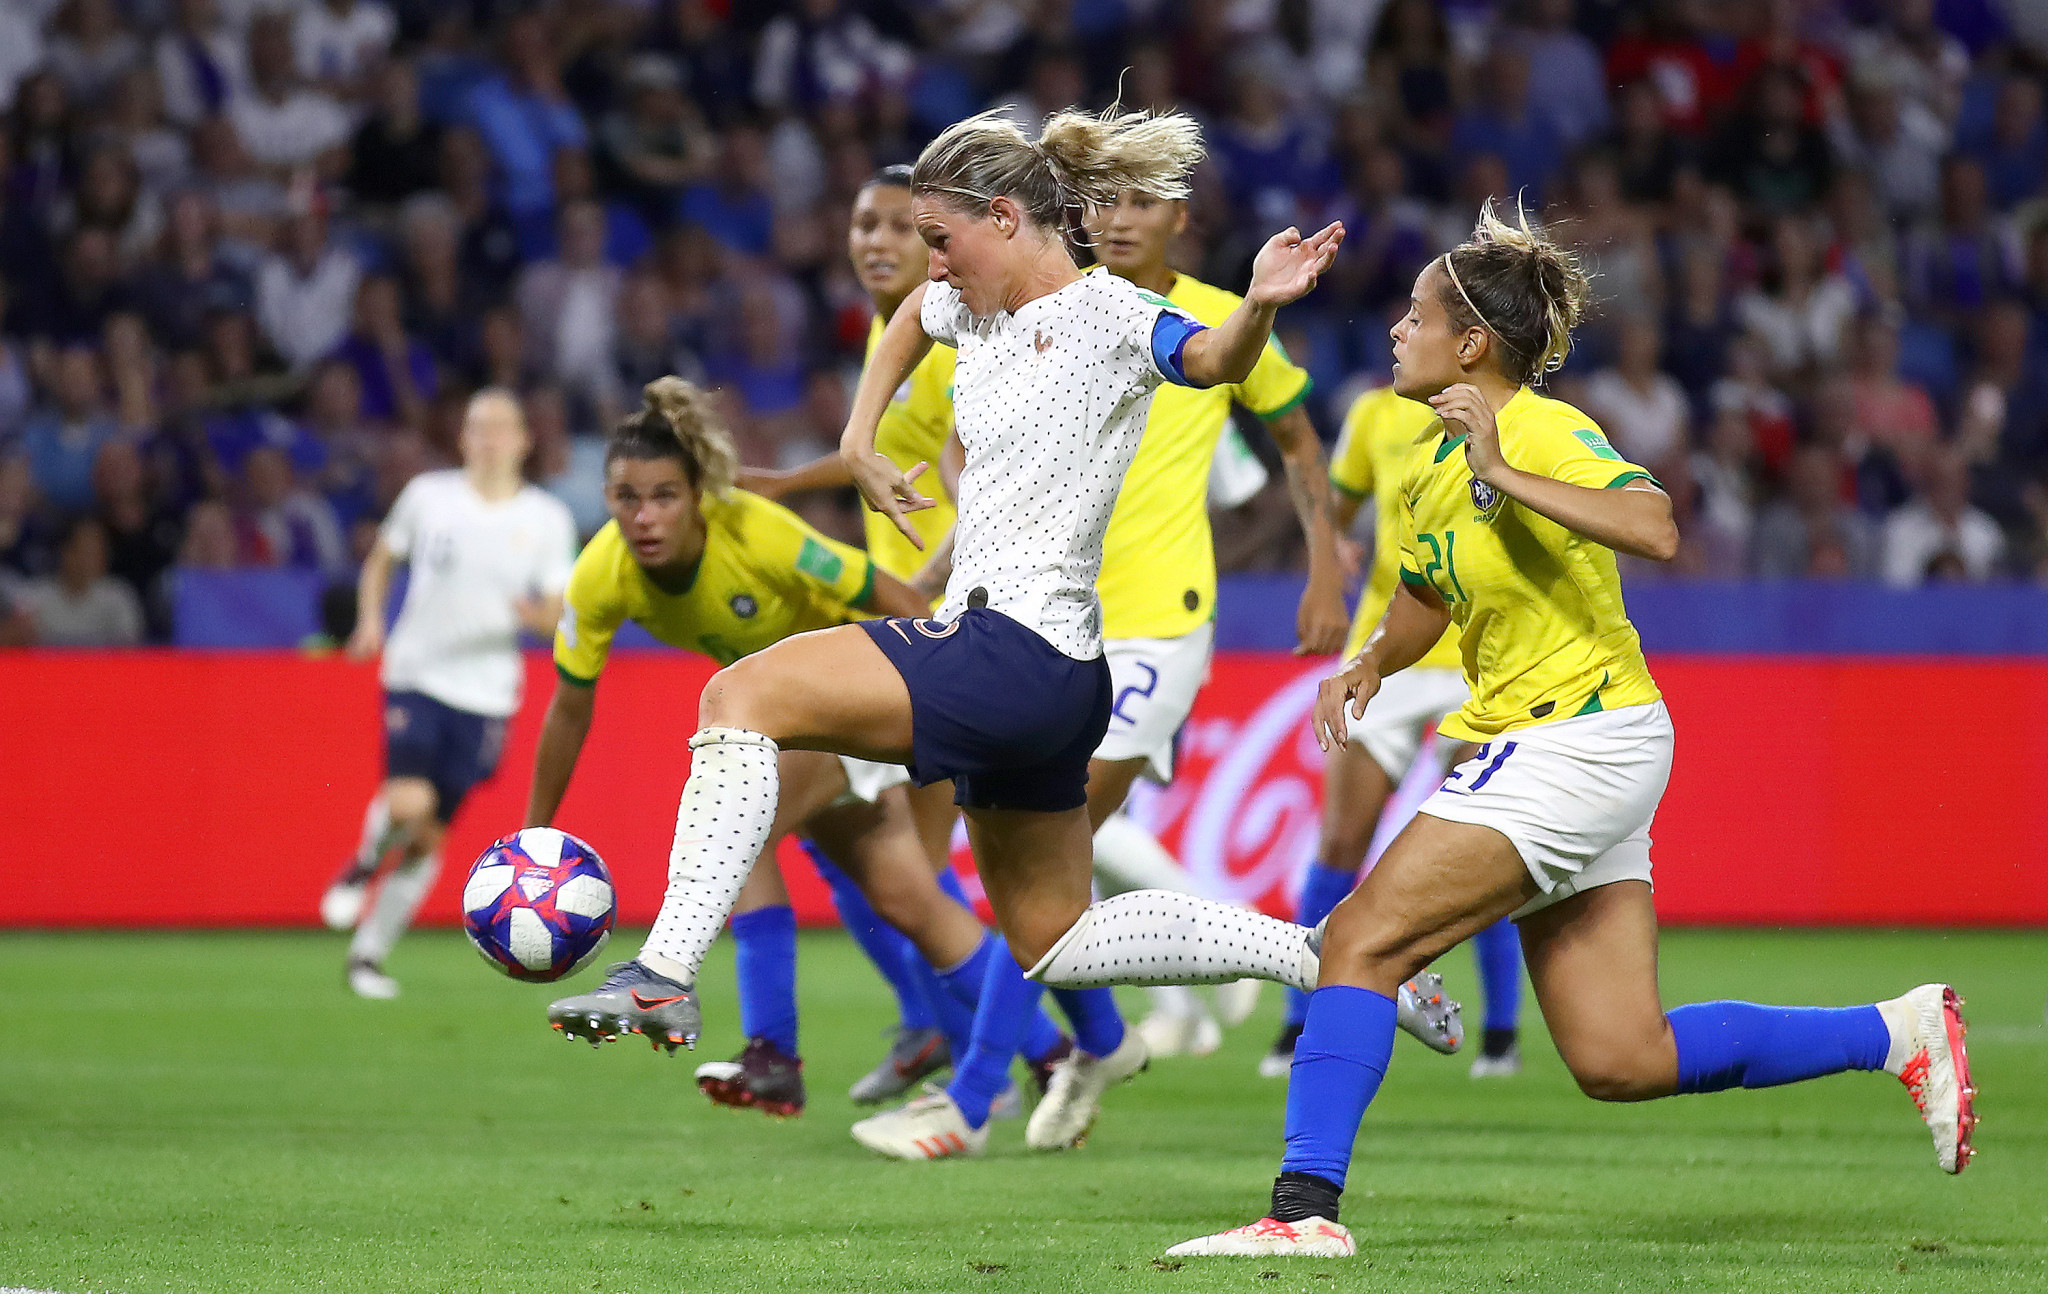 The hosts found their winner in the 107th minute when captain Amandine Henry guided home a free kick © Getty Images